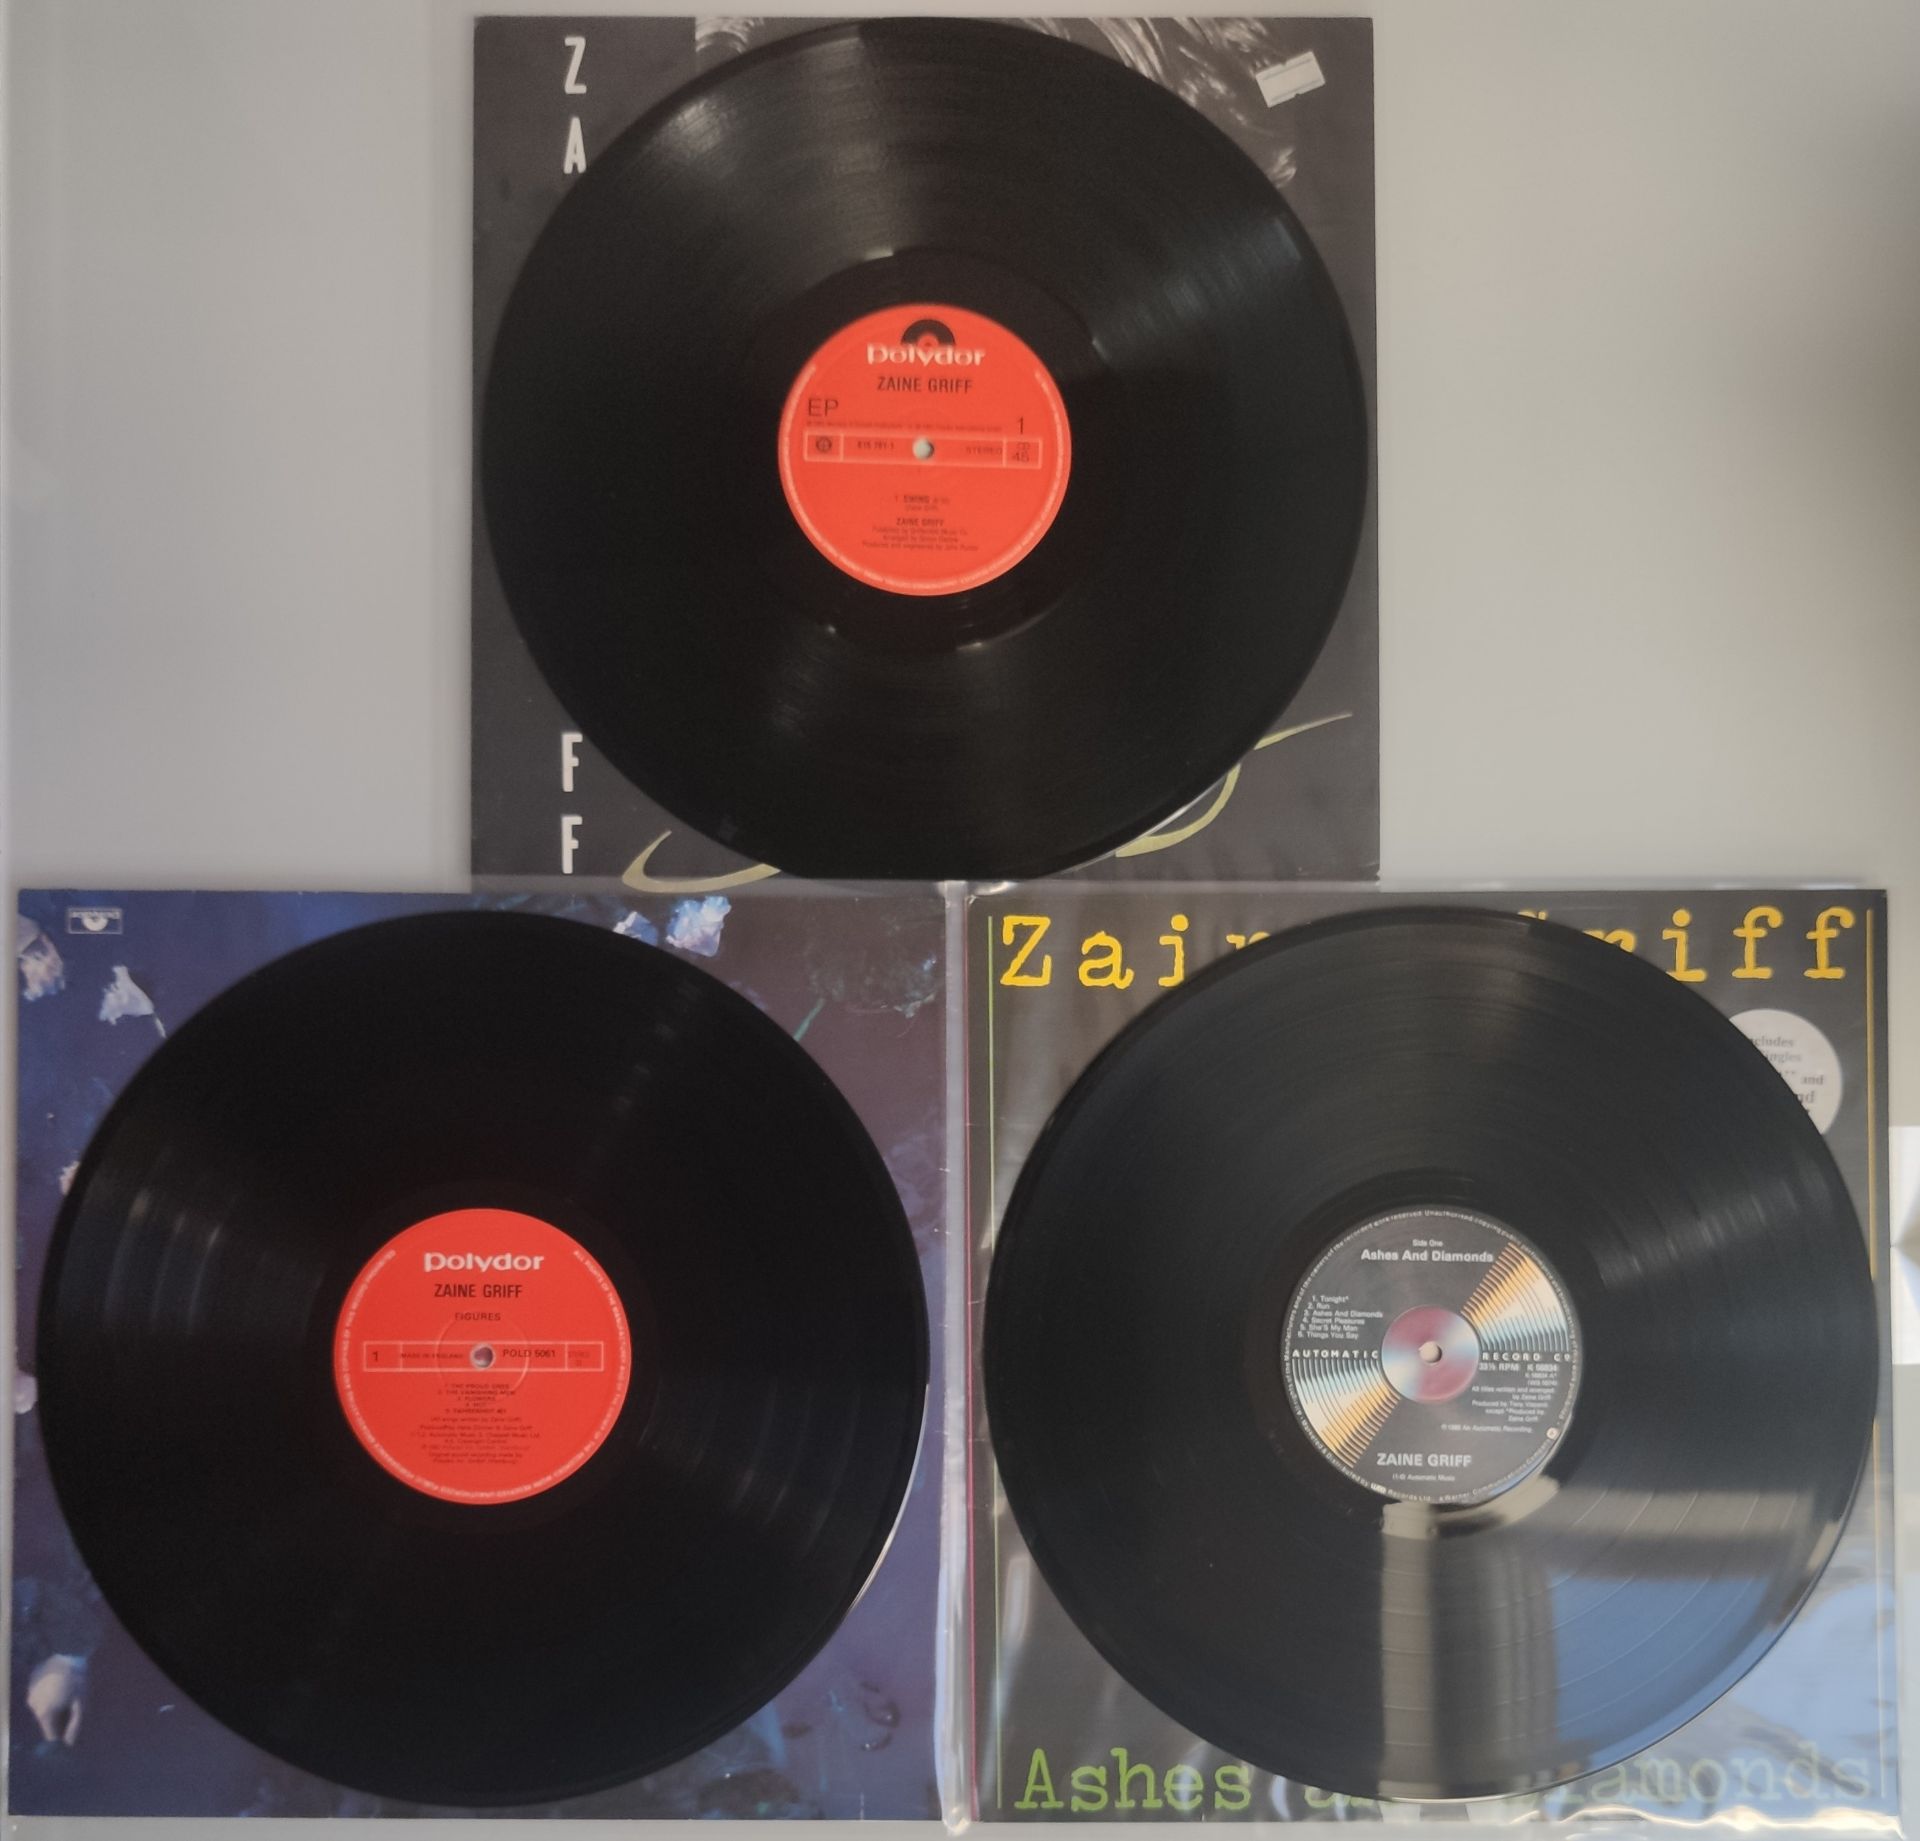 3 x Zaine Griff Vinyl LPs and 12” Single – All UK First Pressings. - Image 2 of 2